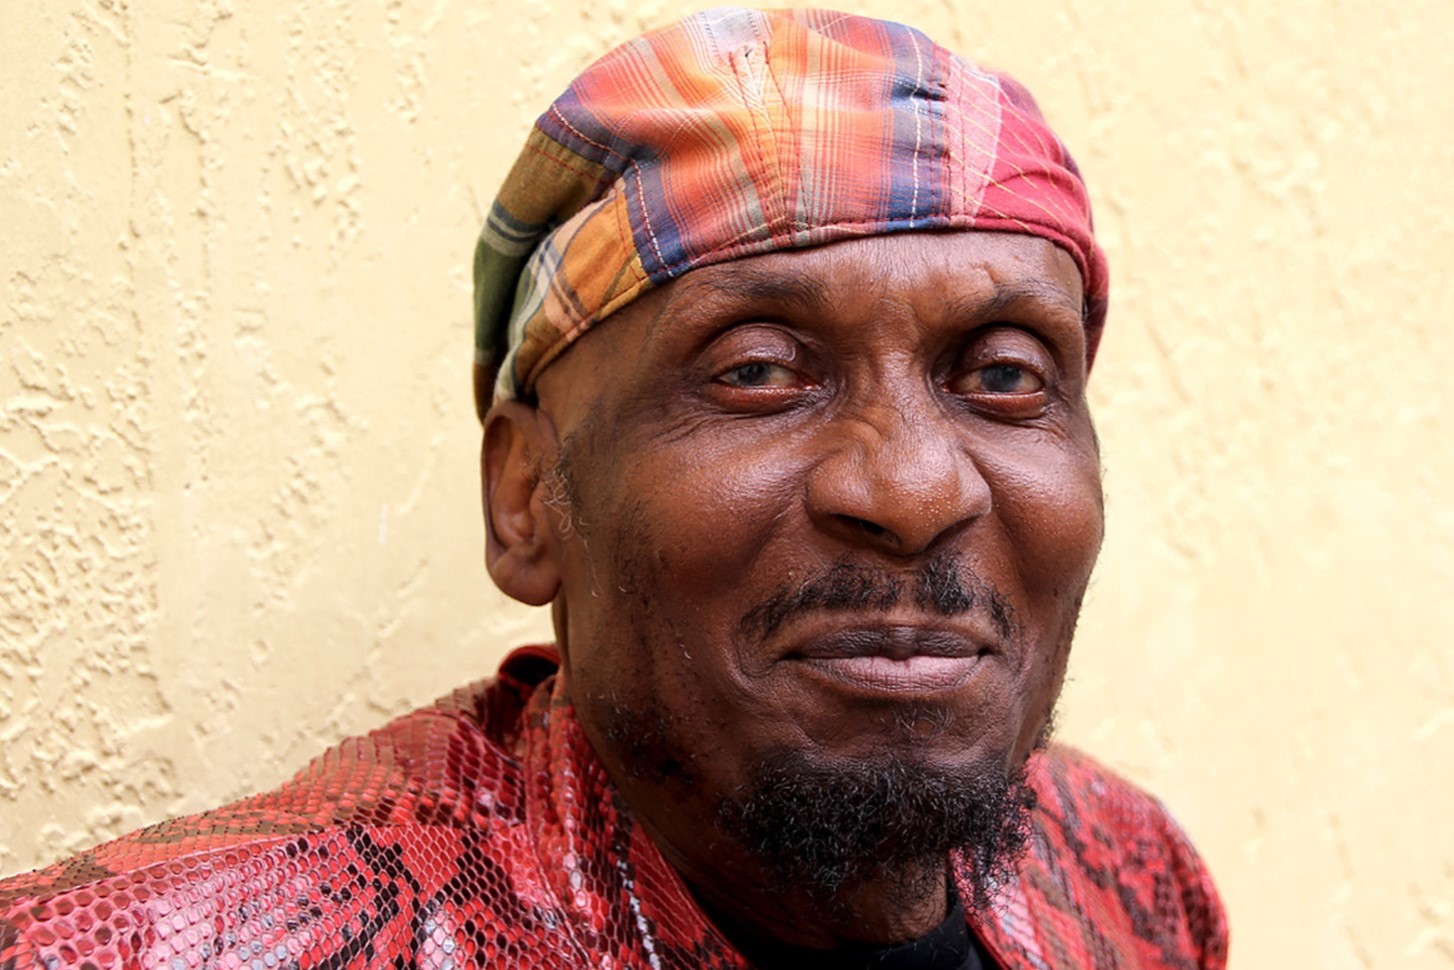 18 Astonishing Facts About Jimmy Cliff - Facts.net